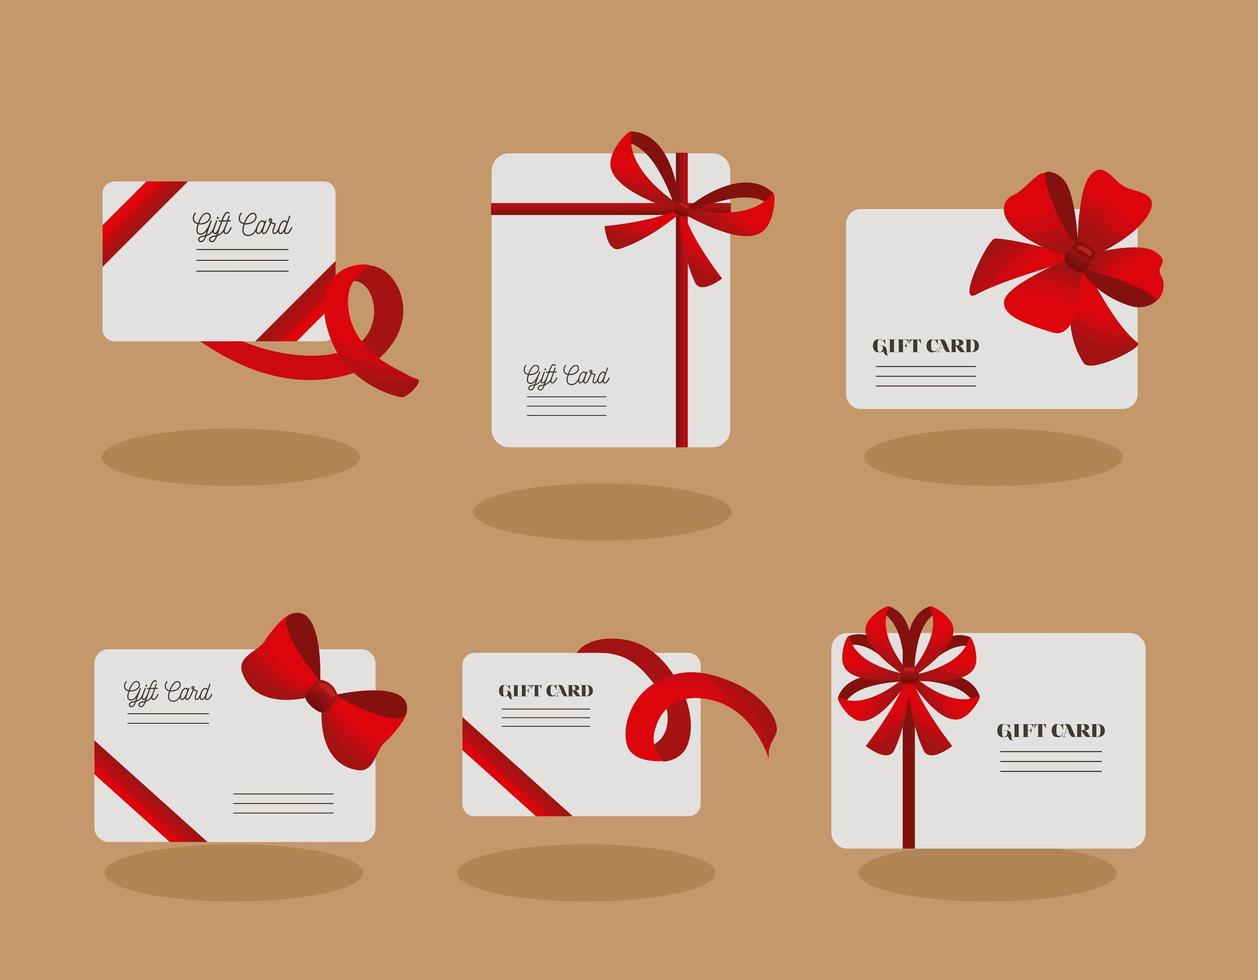 six gifts cards icons vector